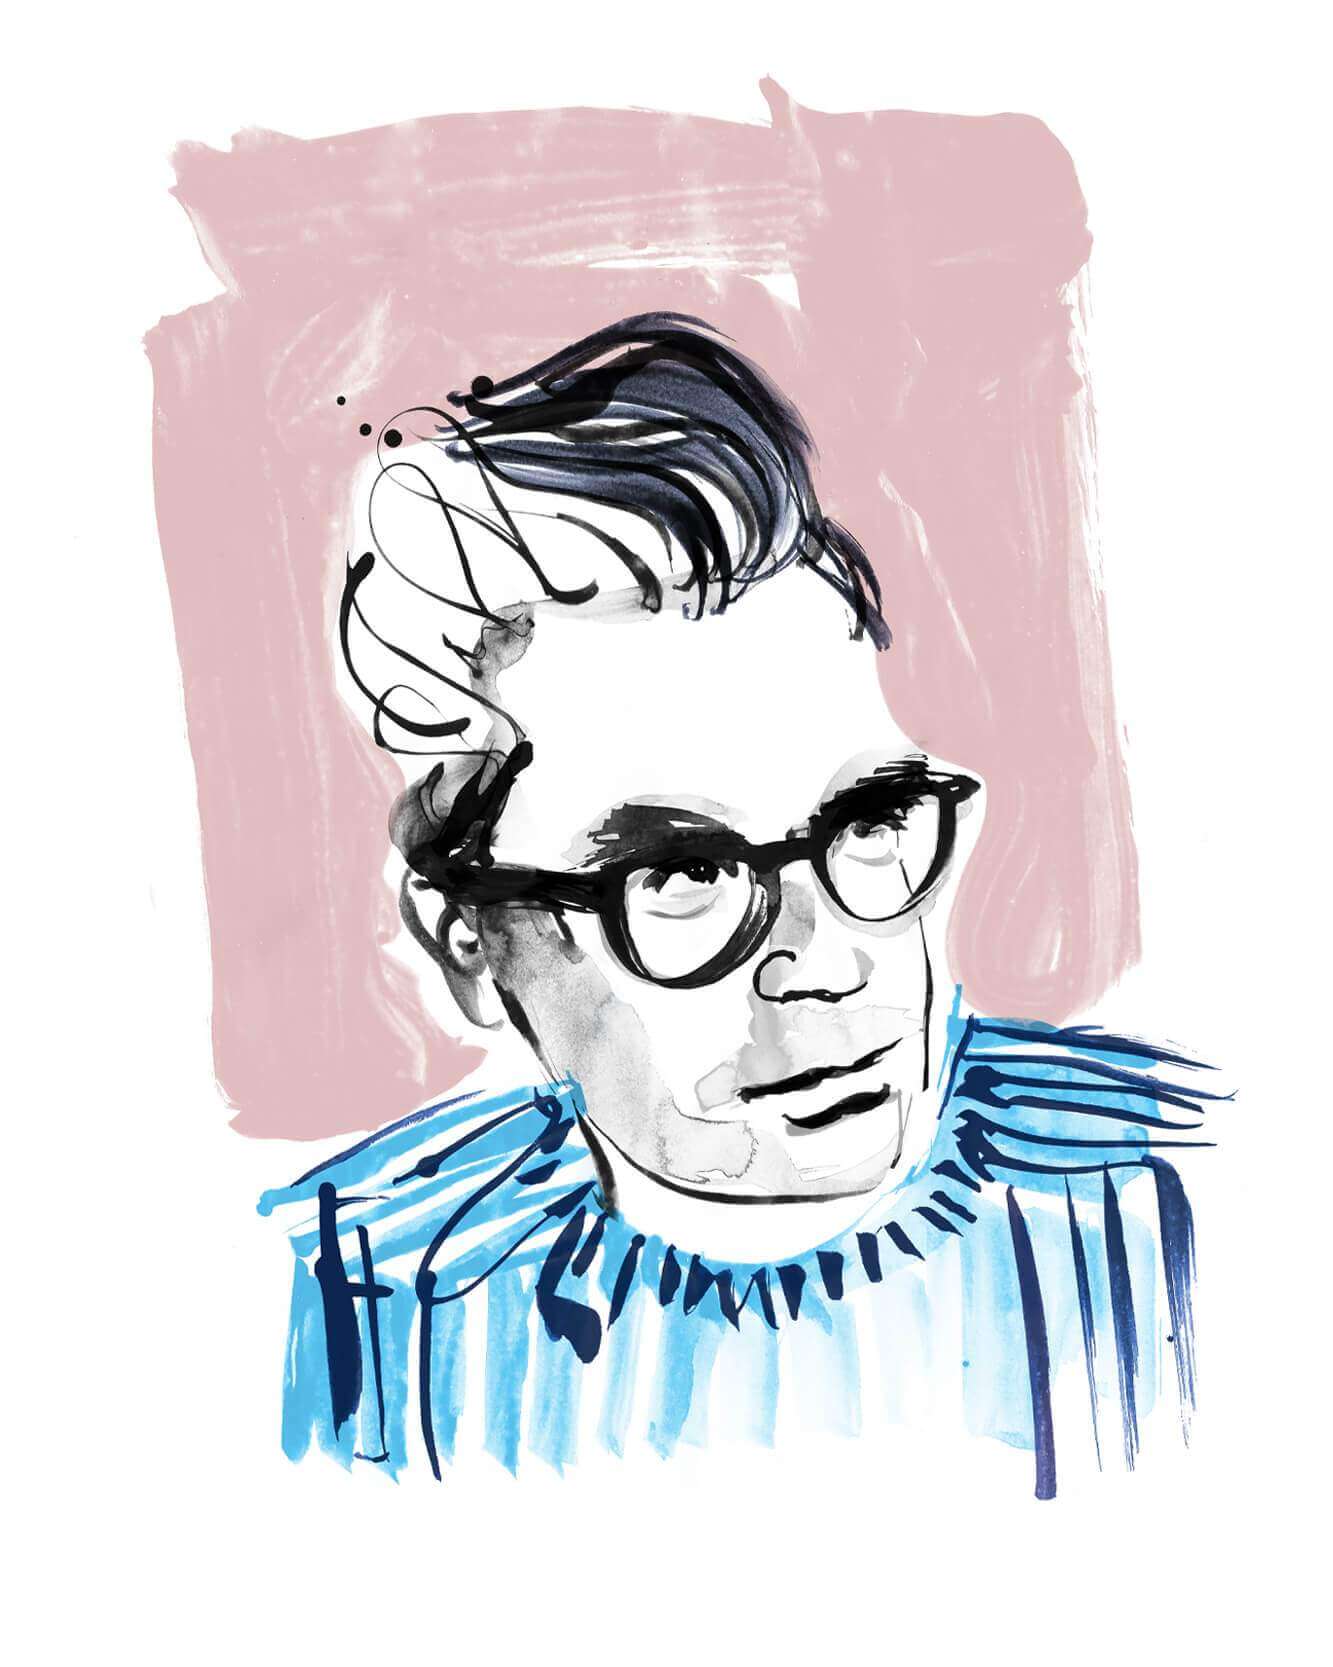 Illustrated portrait of style icon, writer and actor Dan Levy of Schitt's Creek. Illustrated in ink and watercolour.